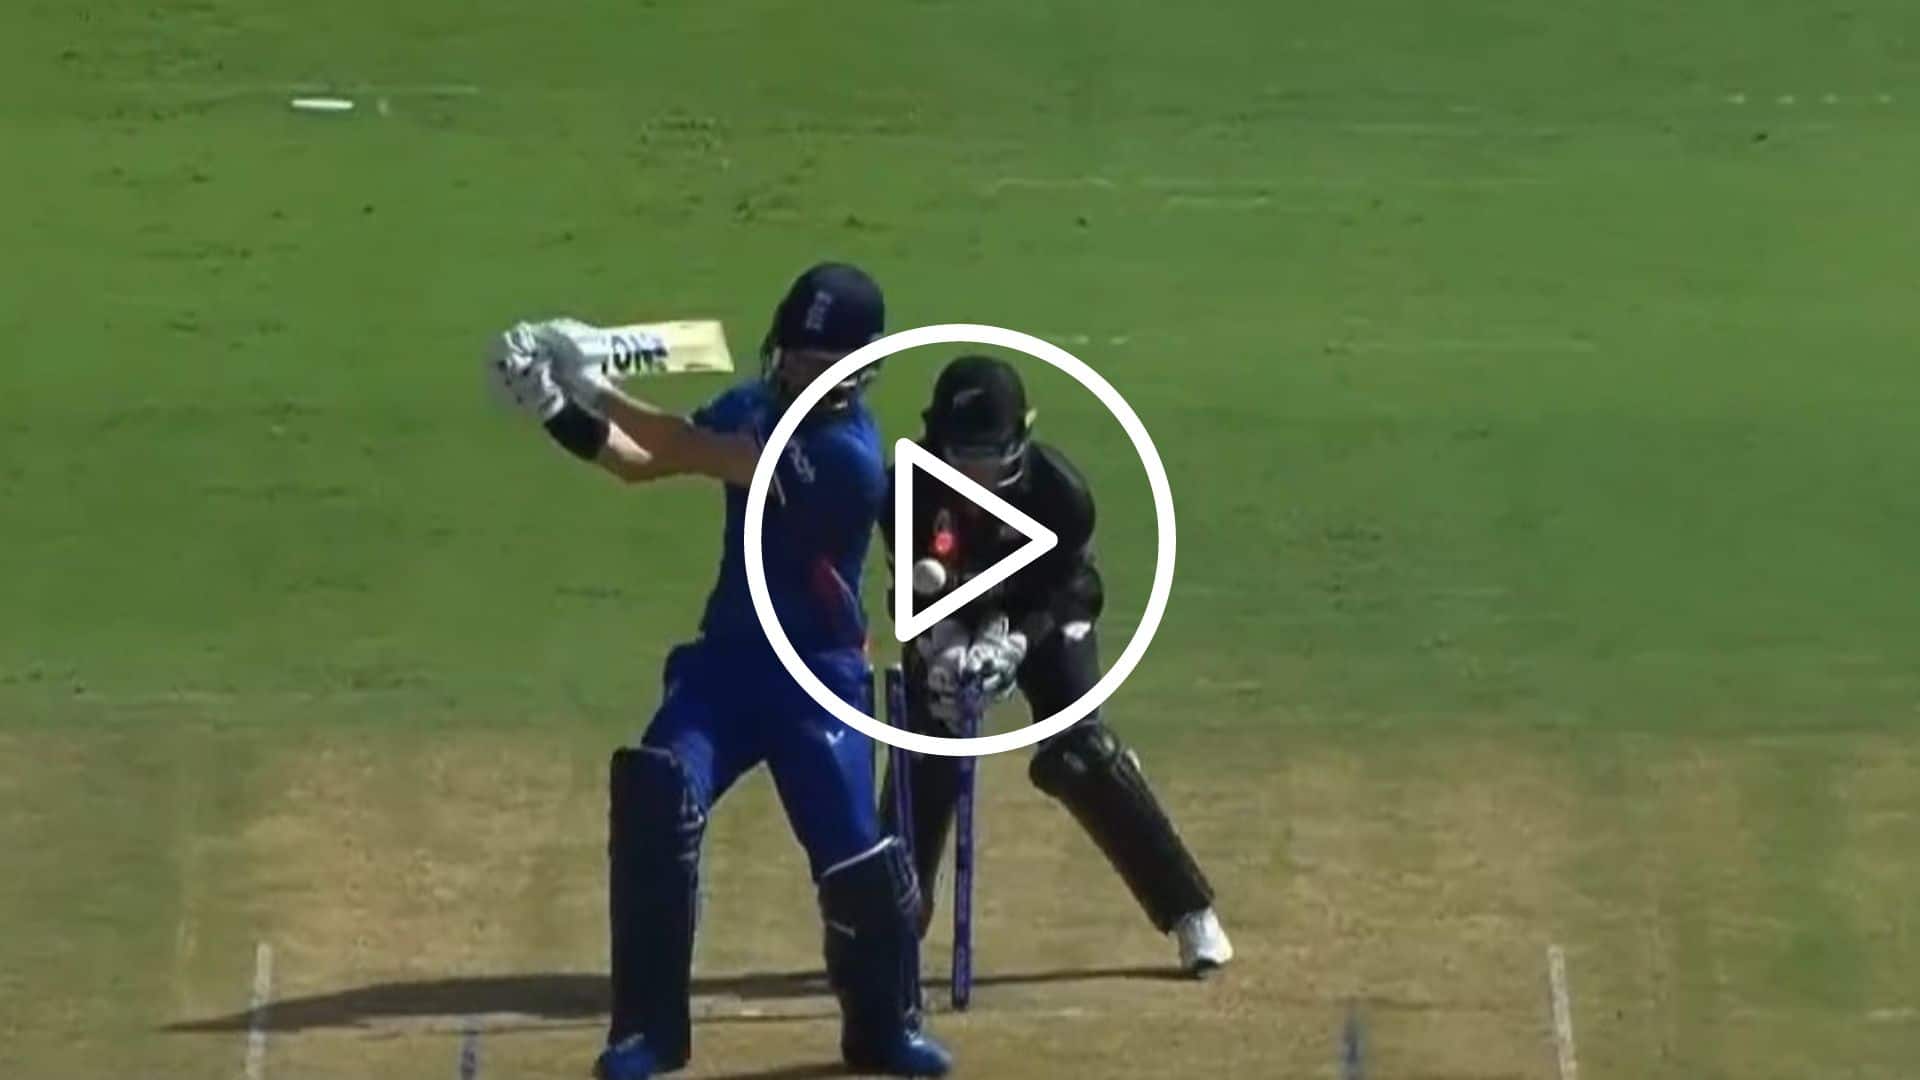 [Watch] Glenn Phillips Castles Moeen Ali With A Ripper In World Cup Opener